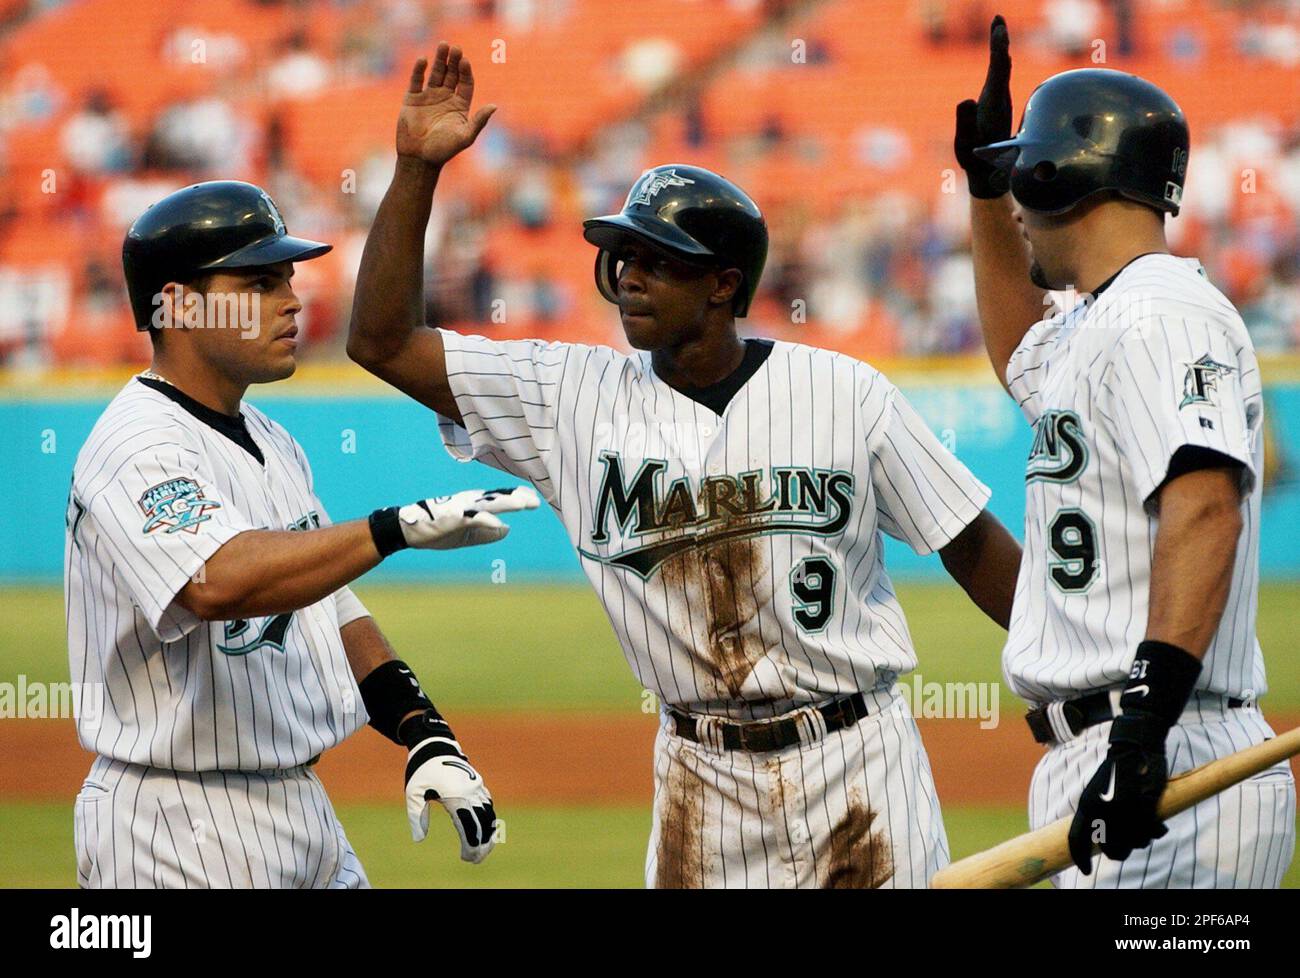 Florida Marlins' Ivan Rodriguez, left, is greeted by teammates Juan Pierre,  center, and Mike Lowell, right, after hitting a three-run home run against  Atlanta Braves pitcher Greg Maddux in the first inning